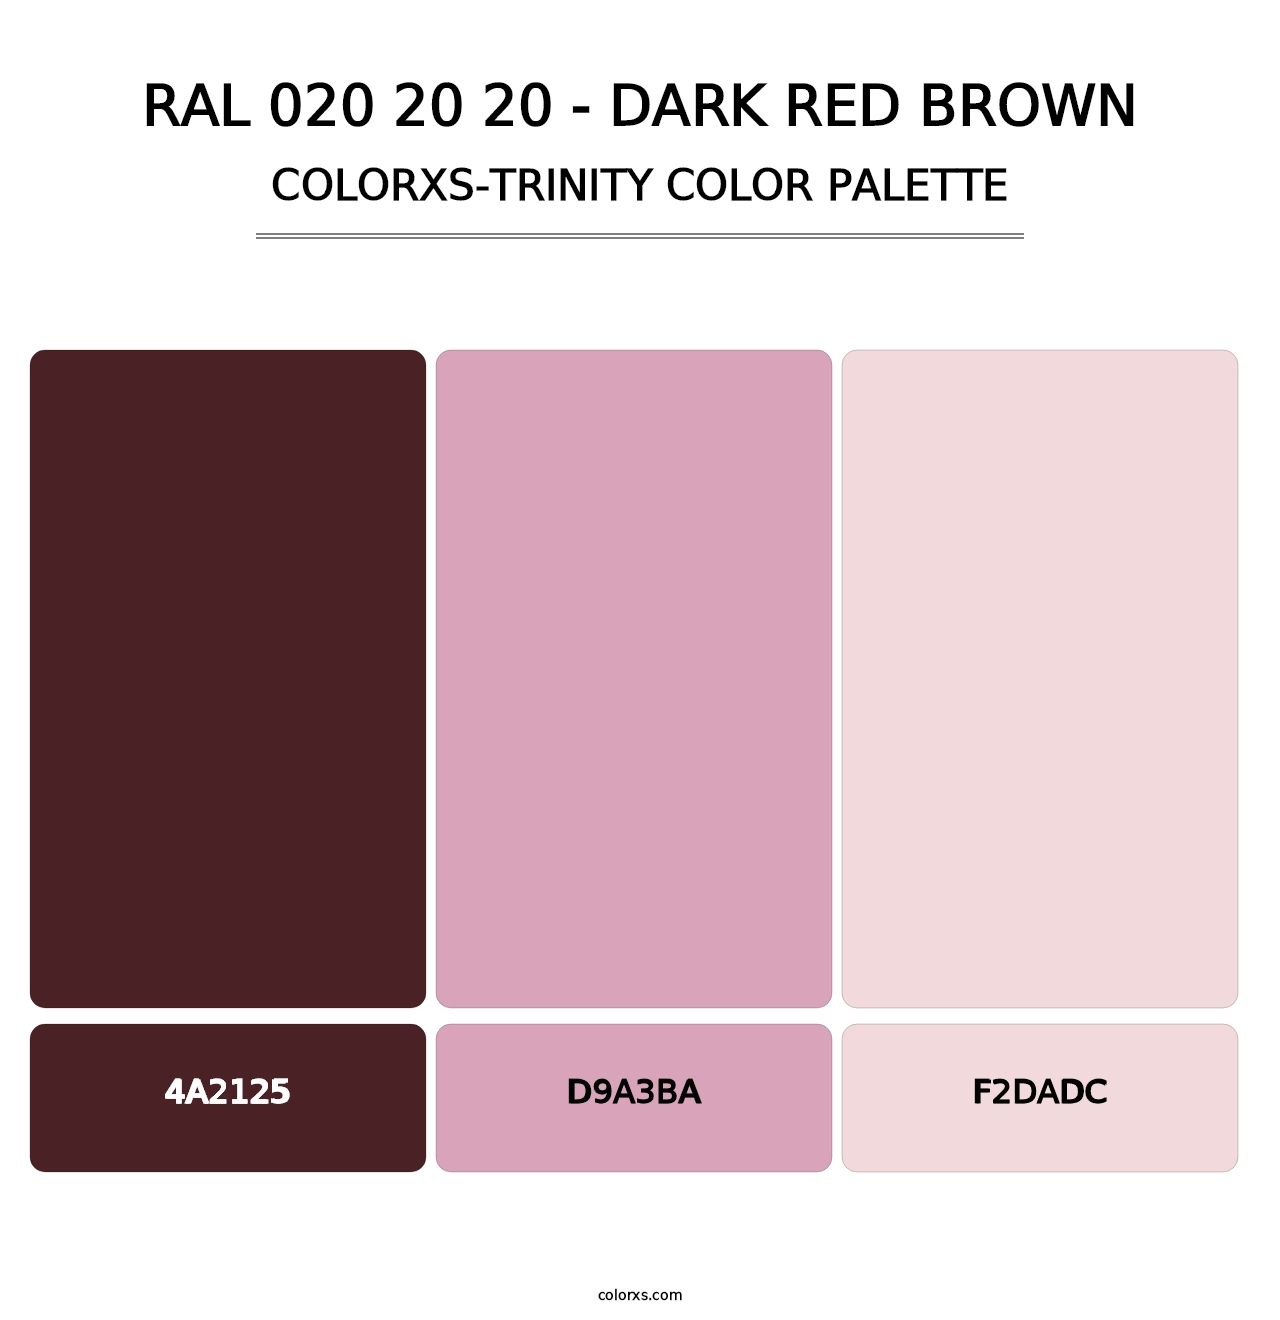 RAL 020 20 20 - Dark Red Brown - Colorxs Trinity Palette